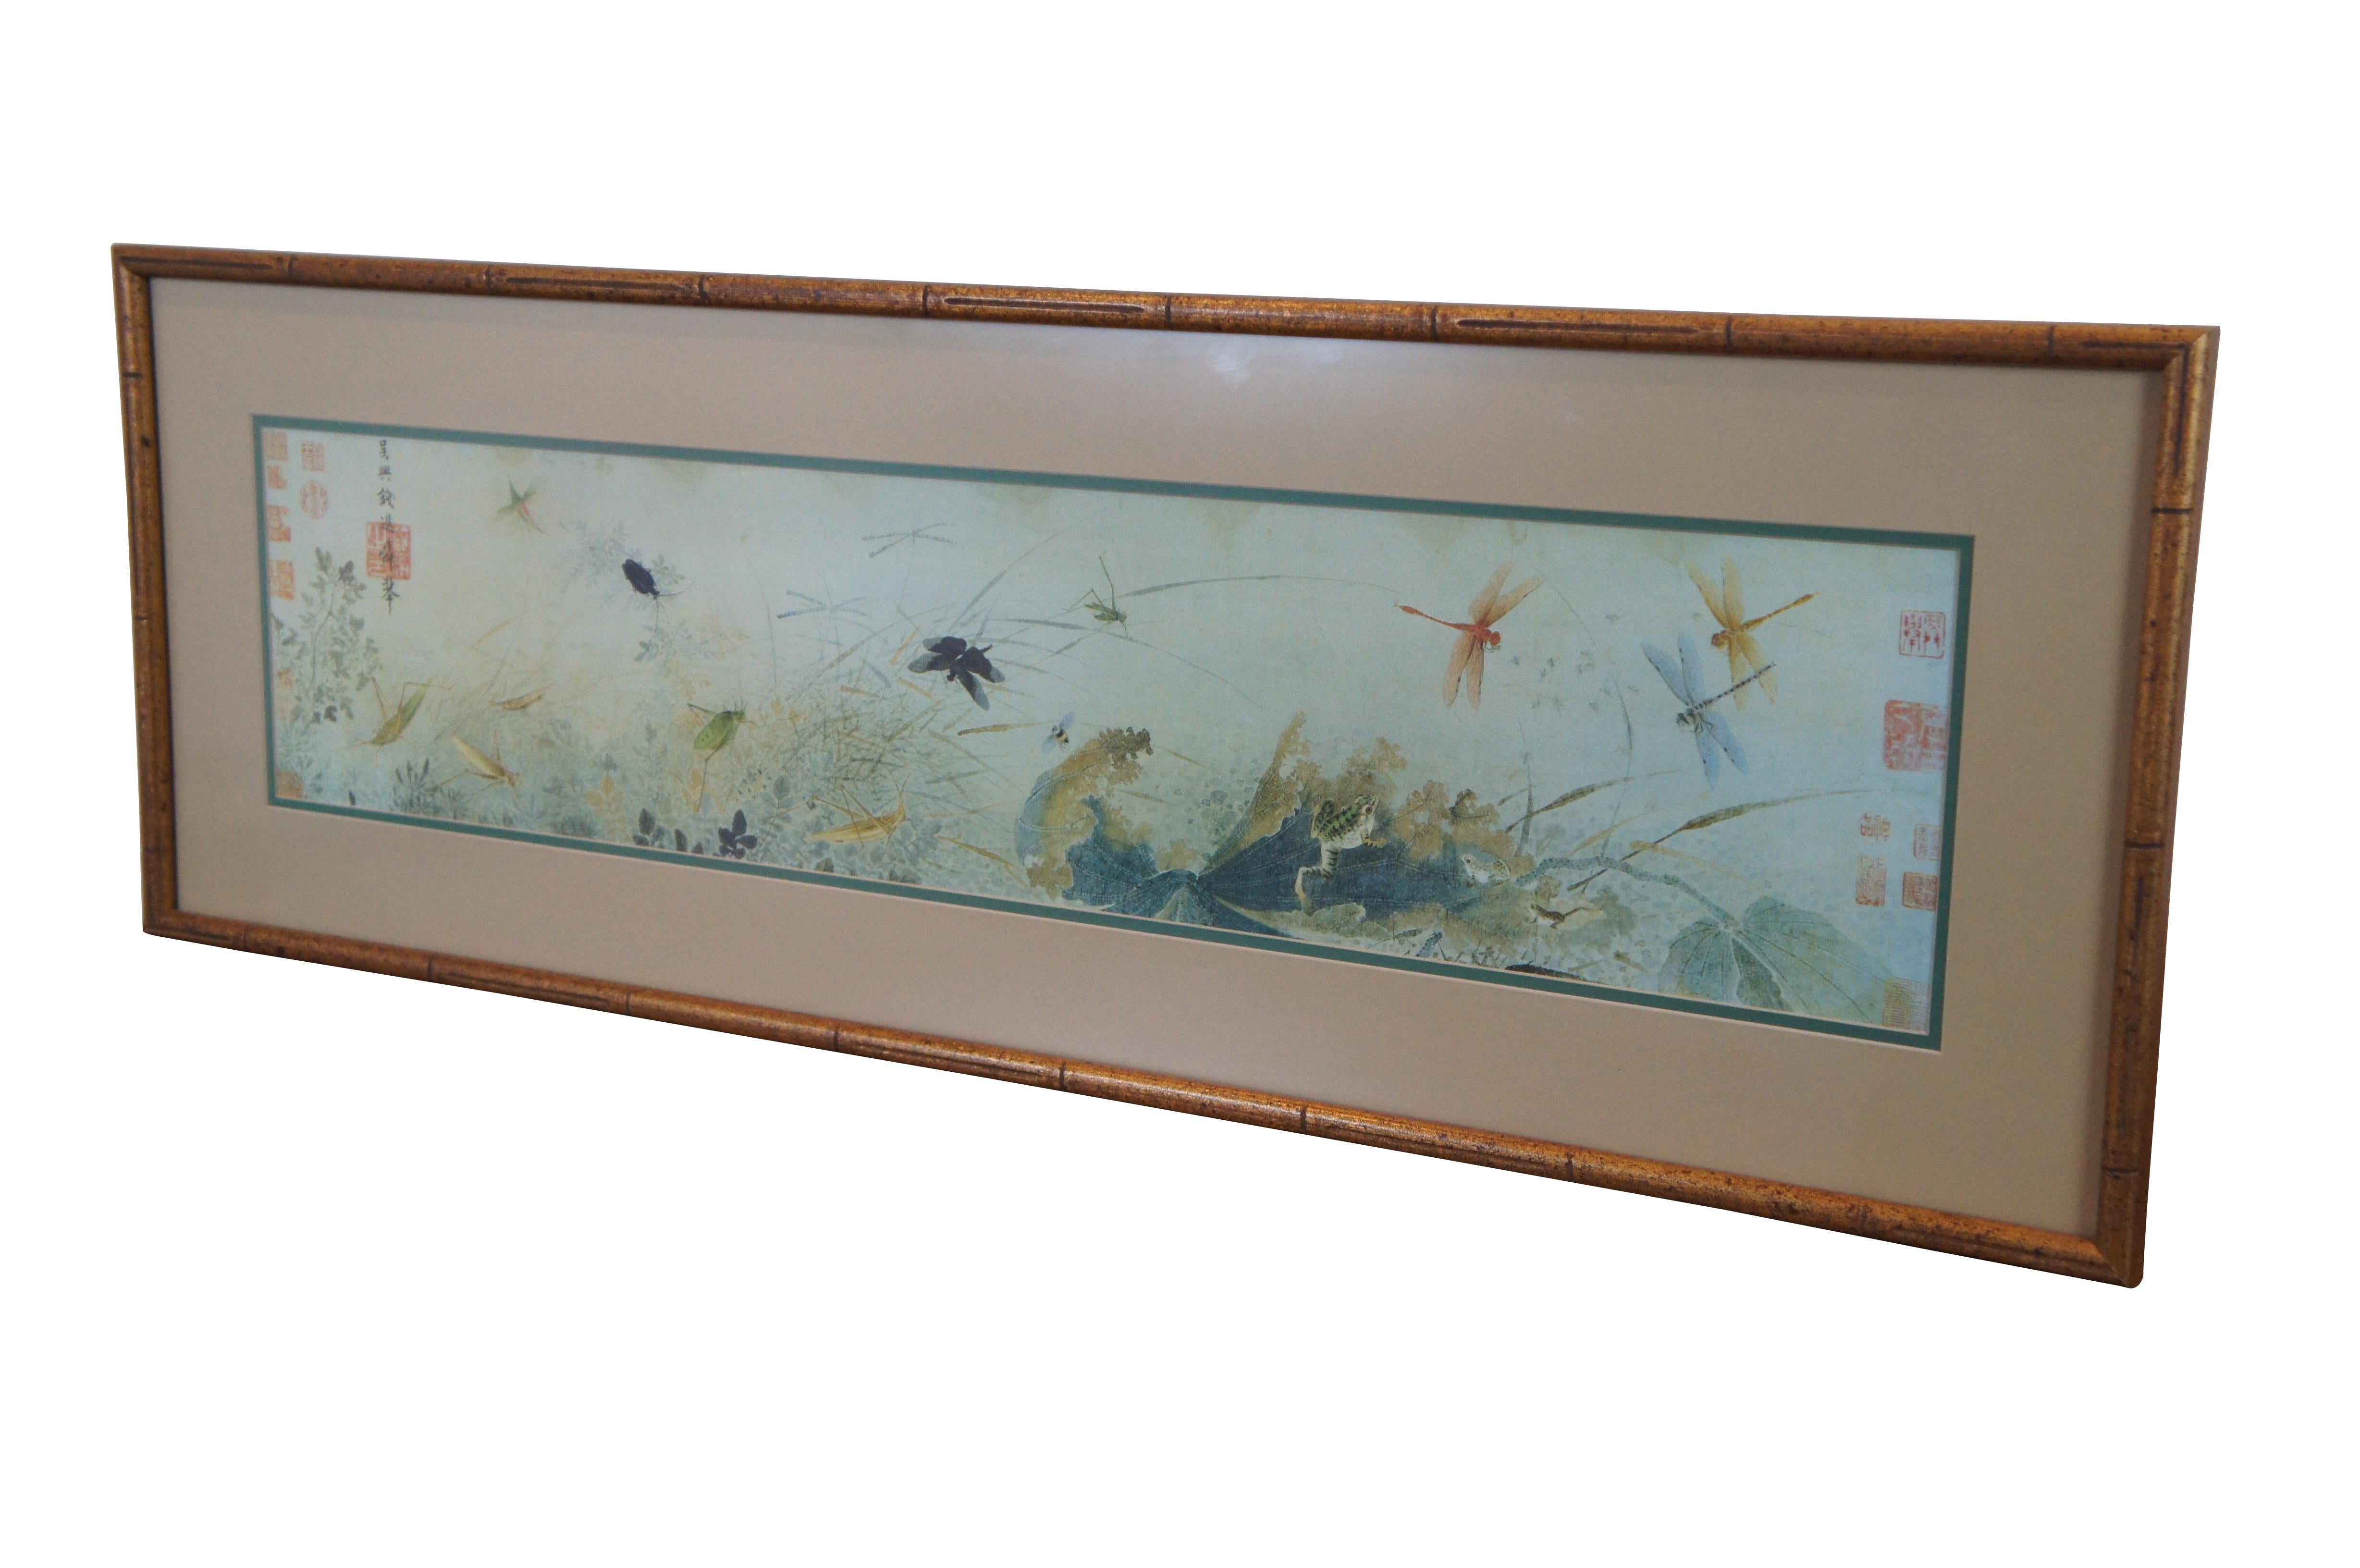 Vintage Qian Xuan, Early Autumn, lithograph print in faux bamboo frame.  Qian Xuan was one of the first scholar-painters to unite poetry, painting, and calligraphy within a single work.

The depiction of the most delicate forms of plant and animal